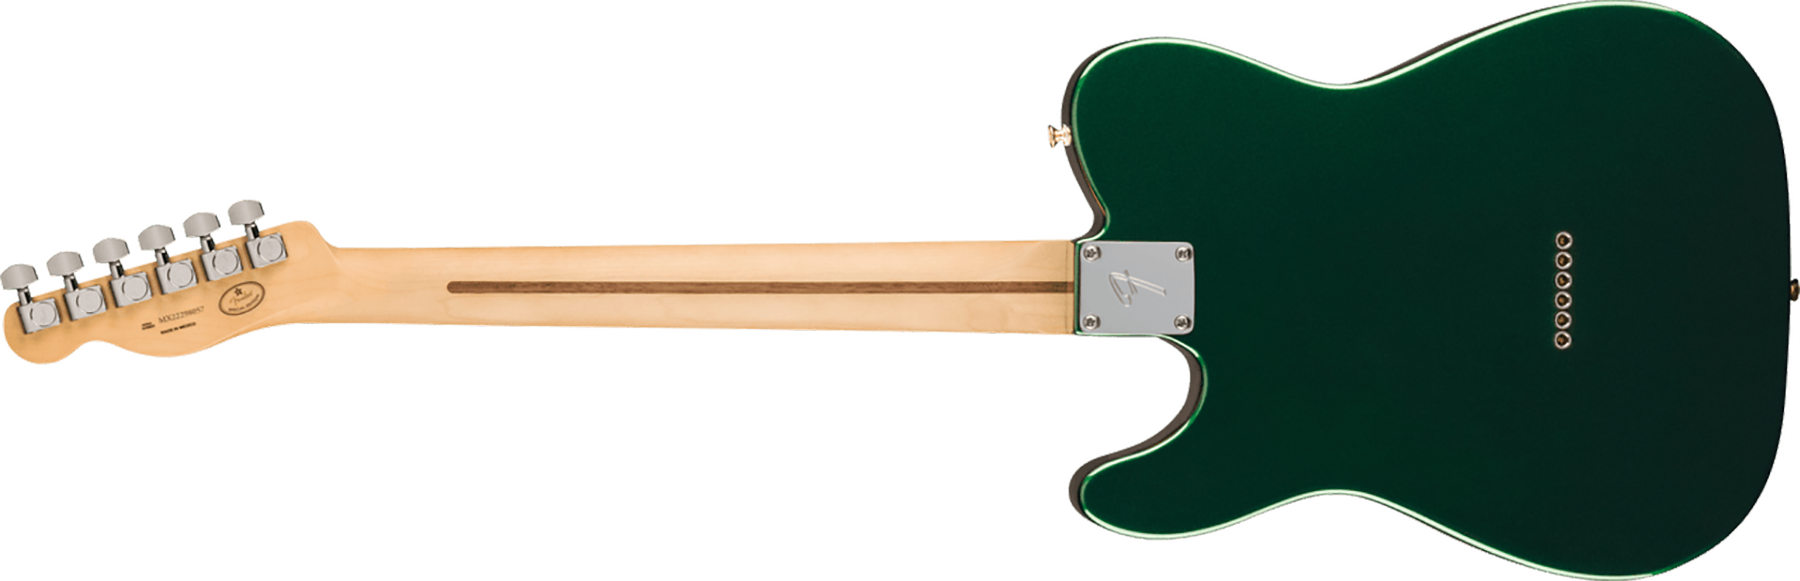 Fender Limited Edition Player